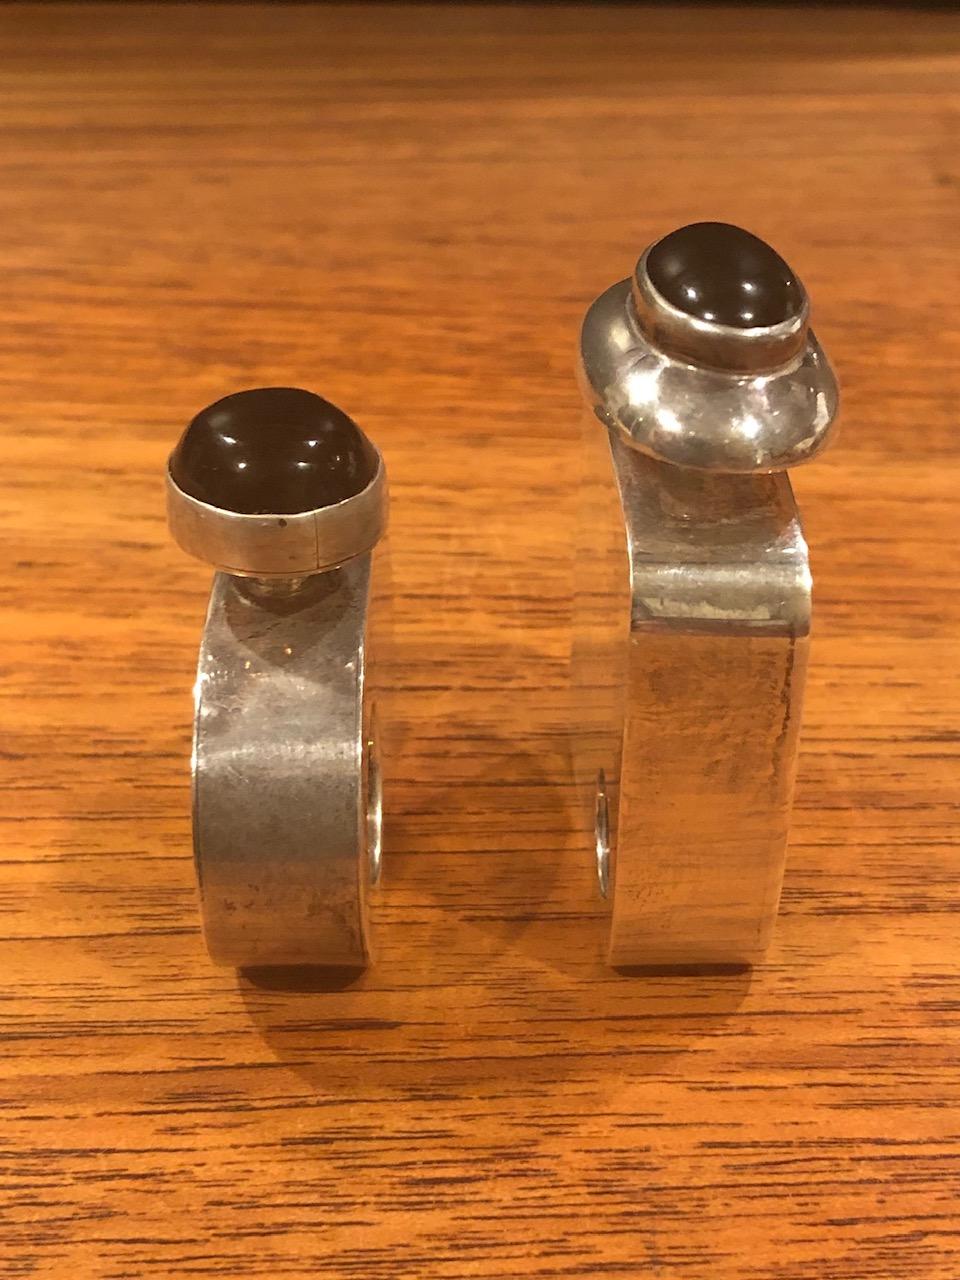 20th Century Pair of Modernist Sterling Silver Perfume Bottles with Onyx Caps